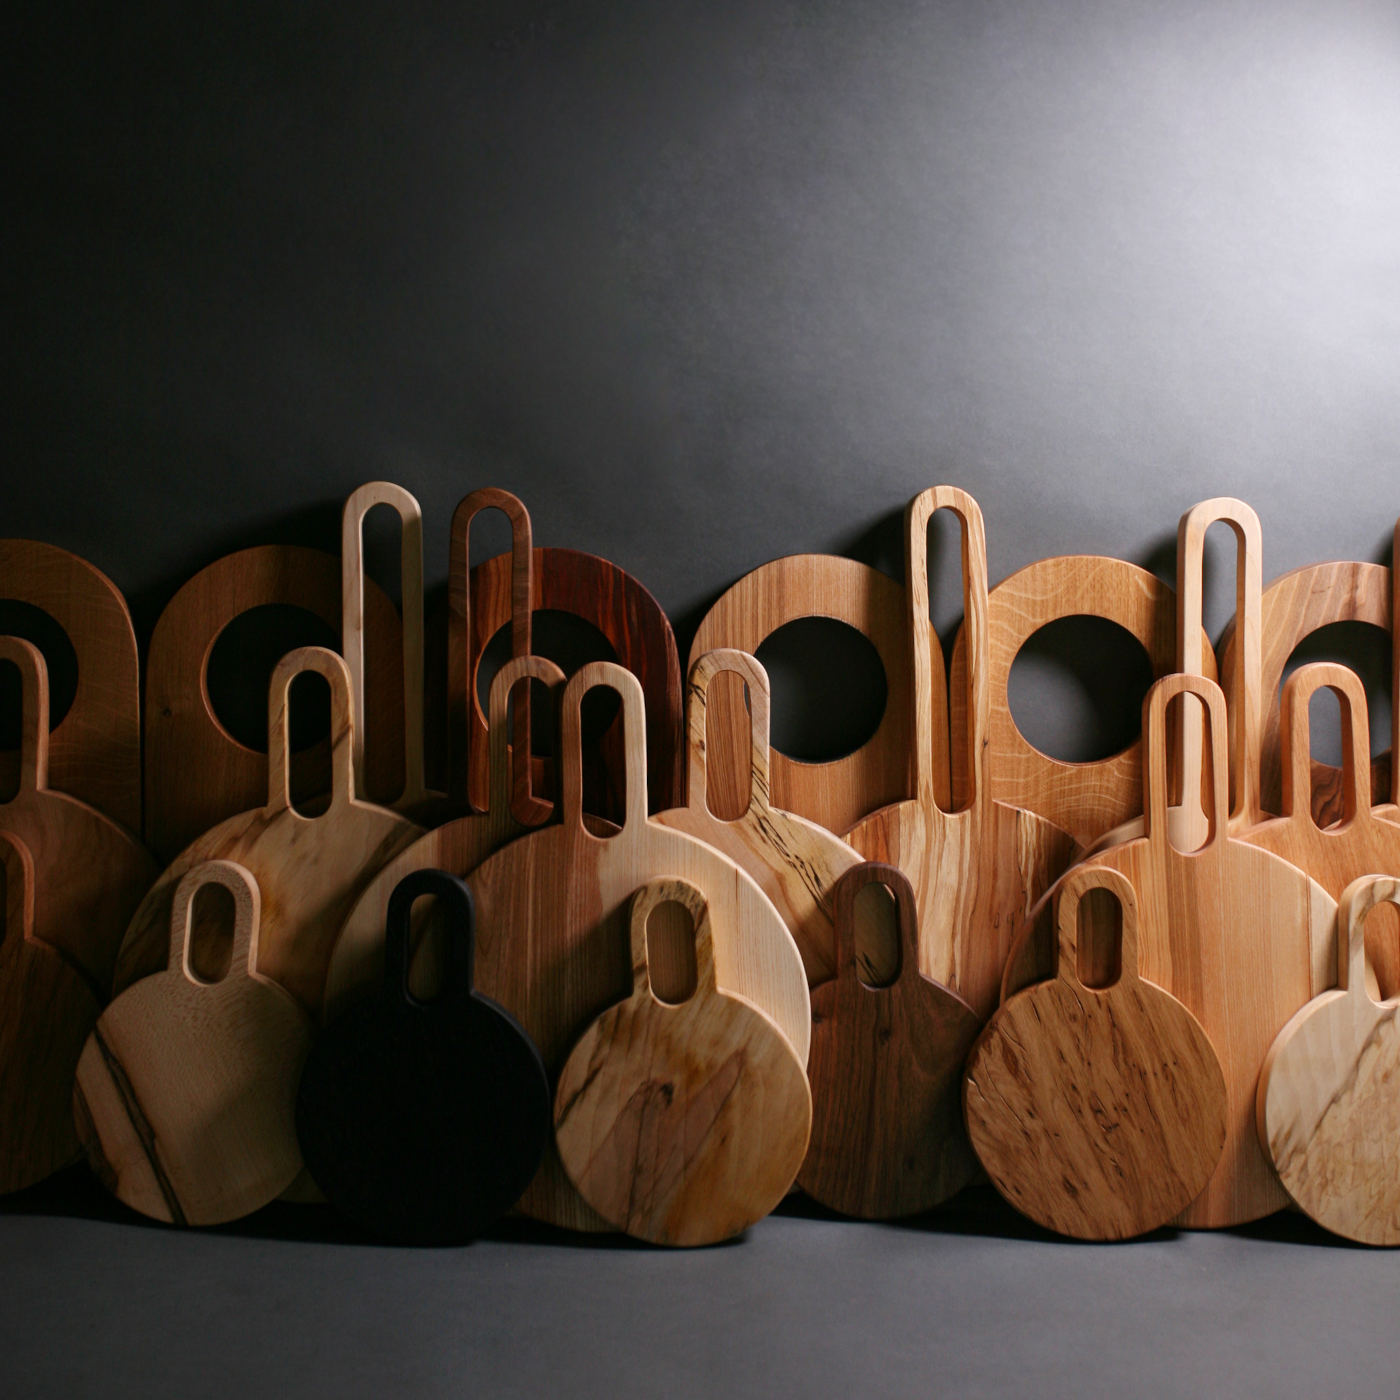 Slow Made Goods boards